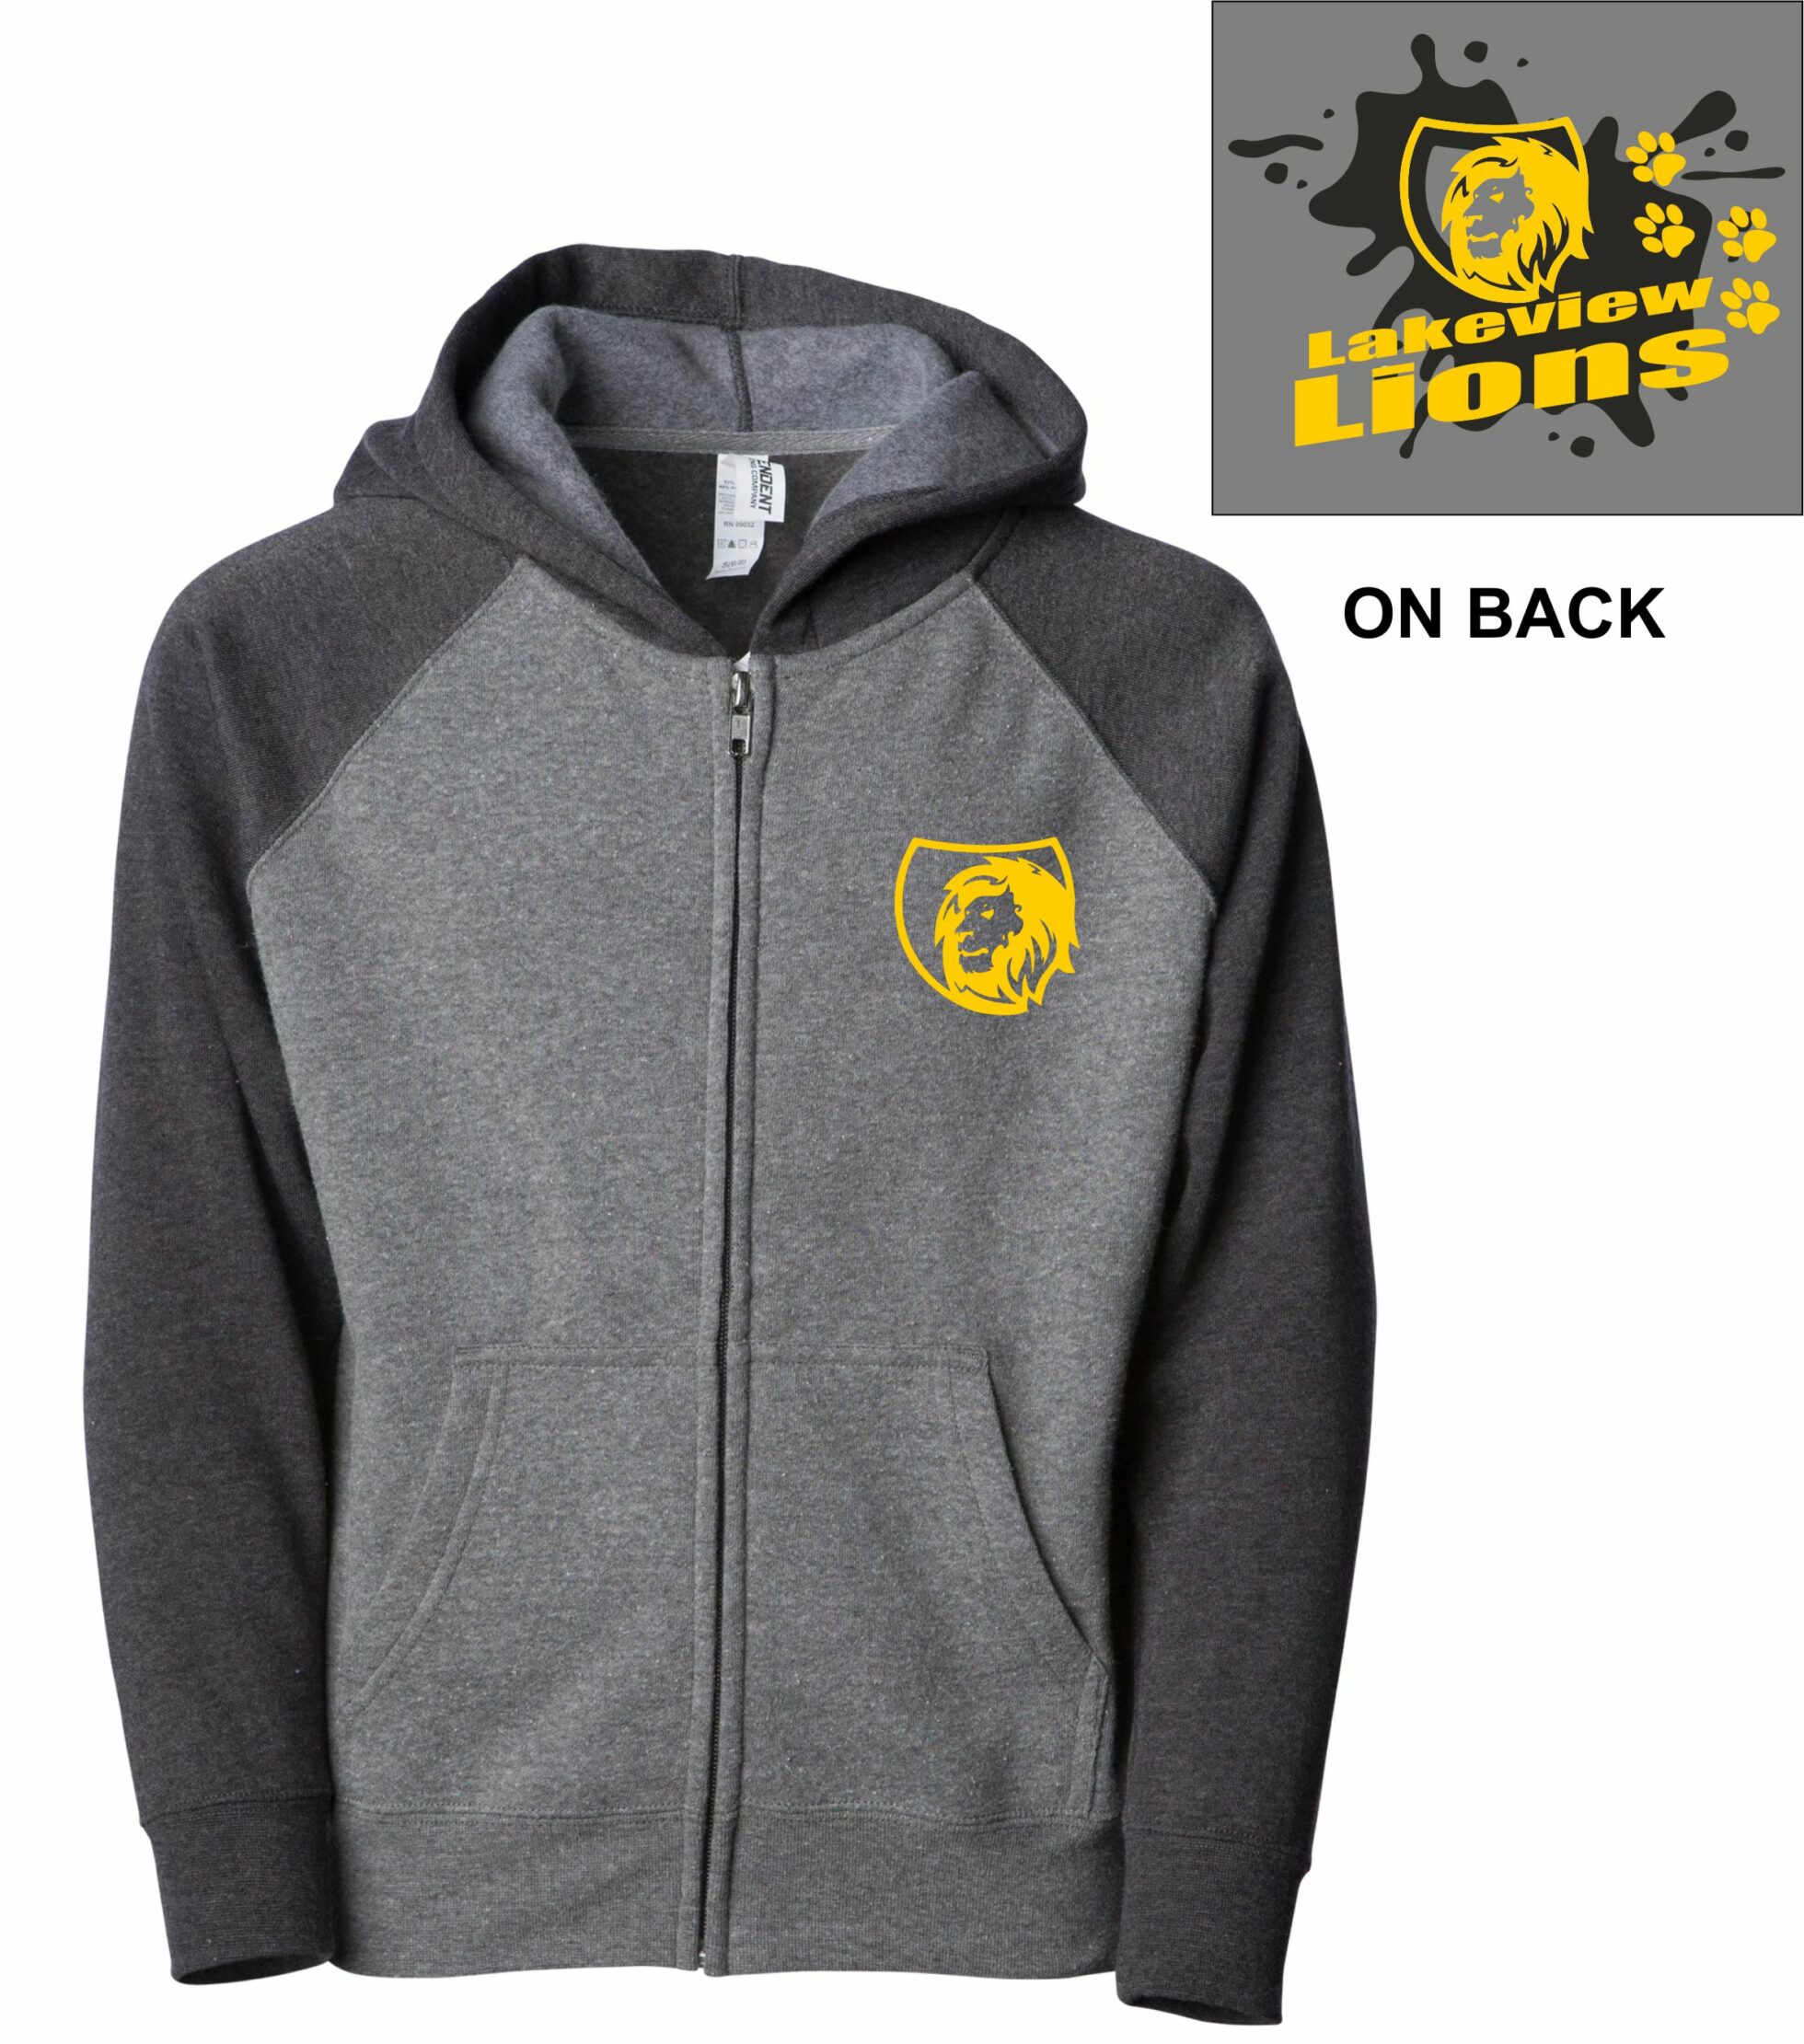 Two tone raglan hoodie with Lakeview Lions splash design – The Bling Lab OC